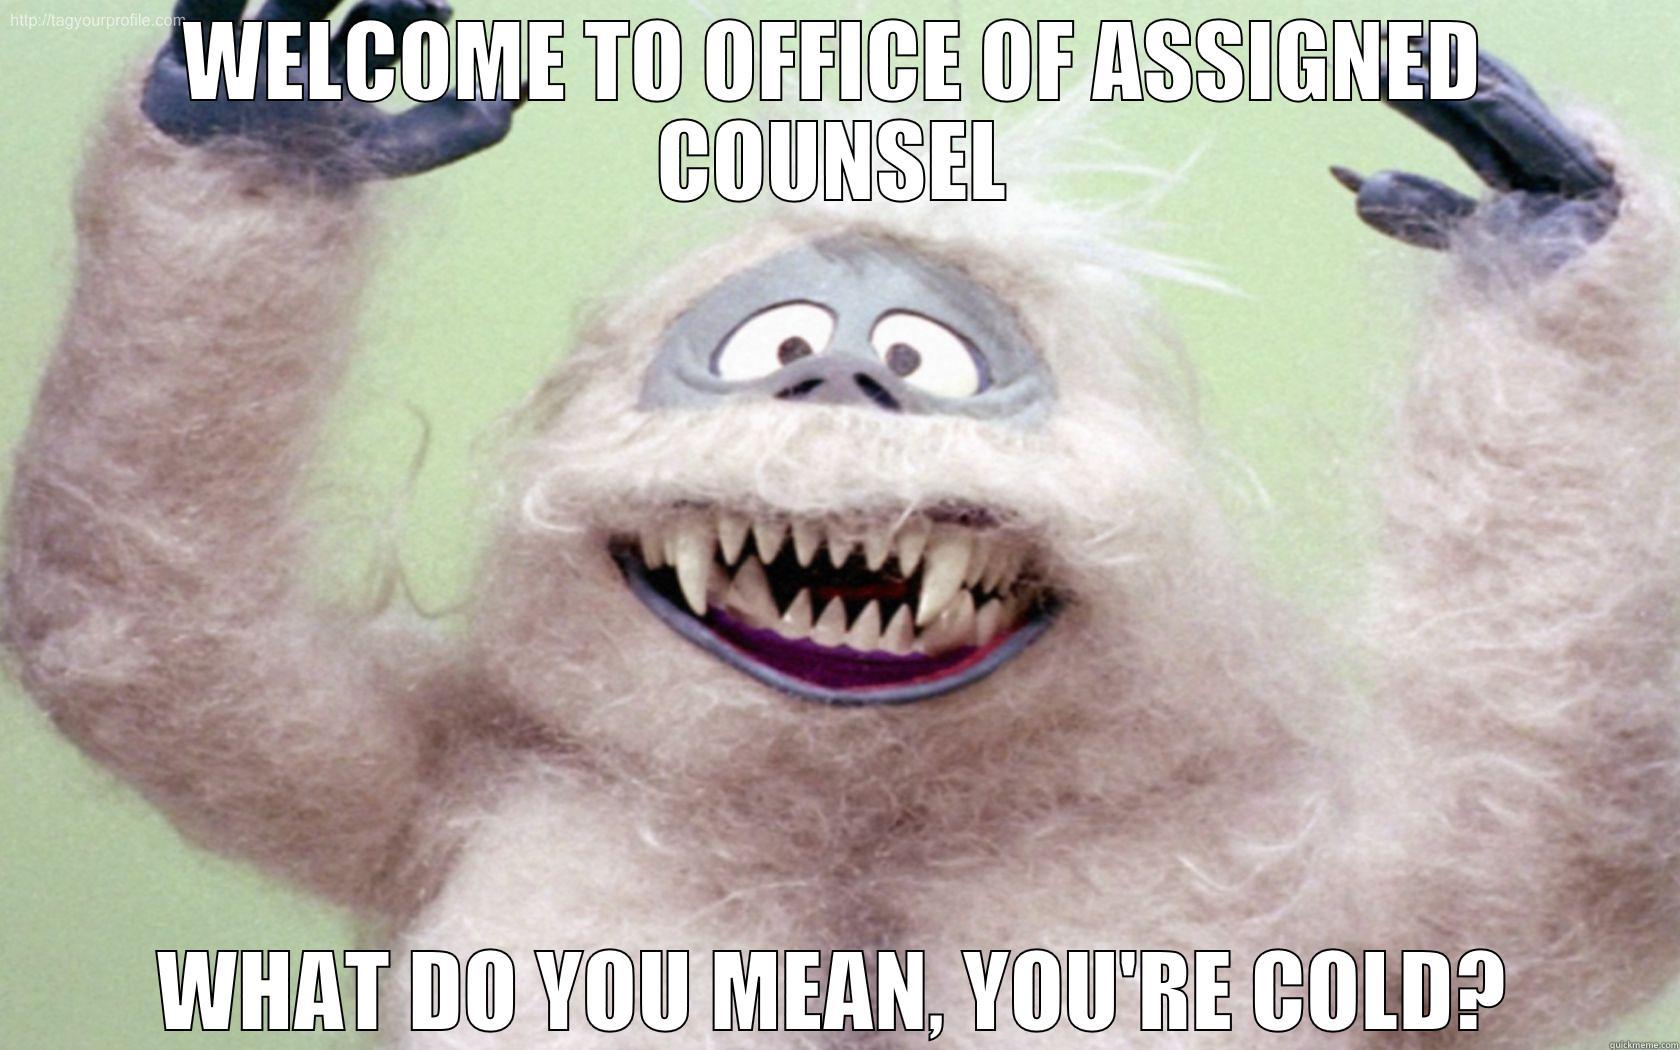 WELCOME TO OFFICE OF ASSIGNED COUNSEL WHAT DO YOU MEAN, YOU'RE COLD? Misc